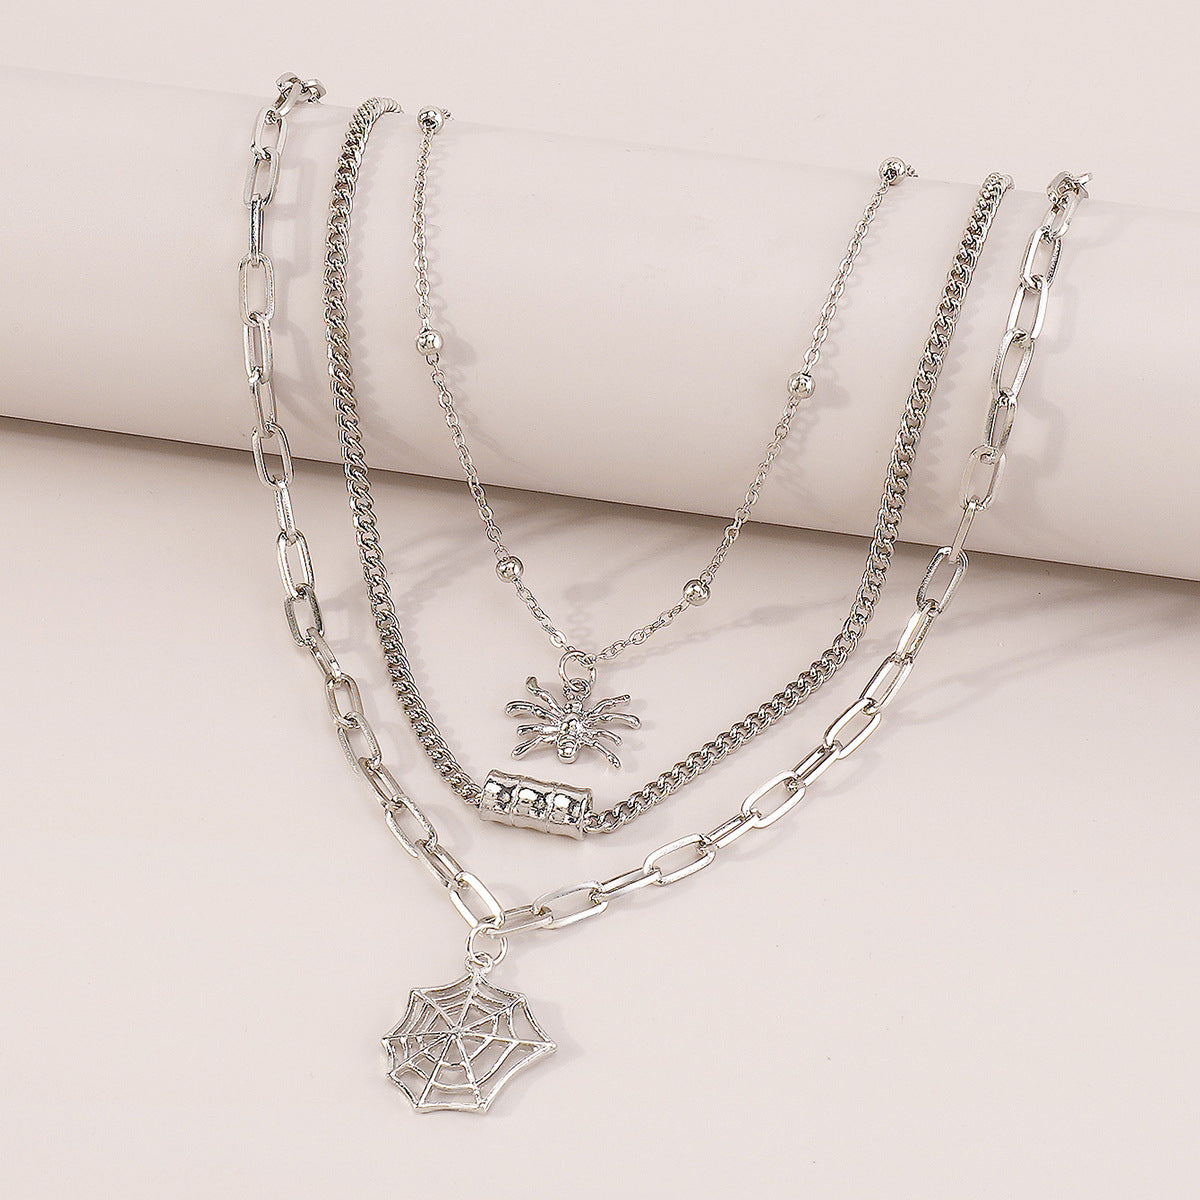 Silver-Plated Spider Web Layered Pendant Necklace